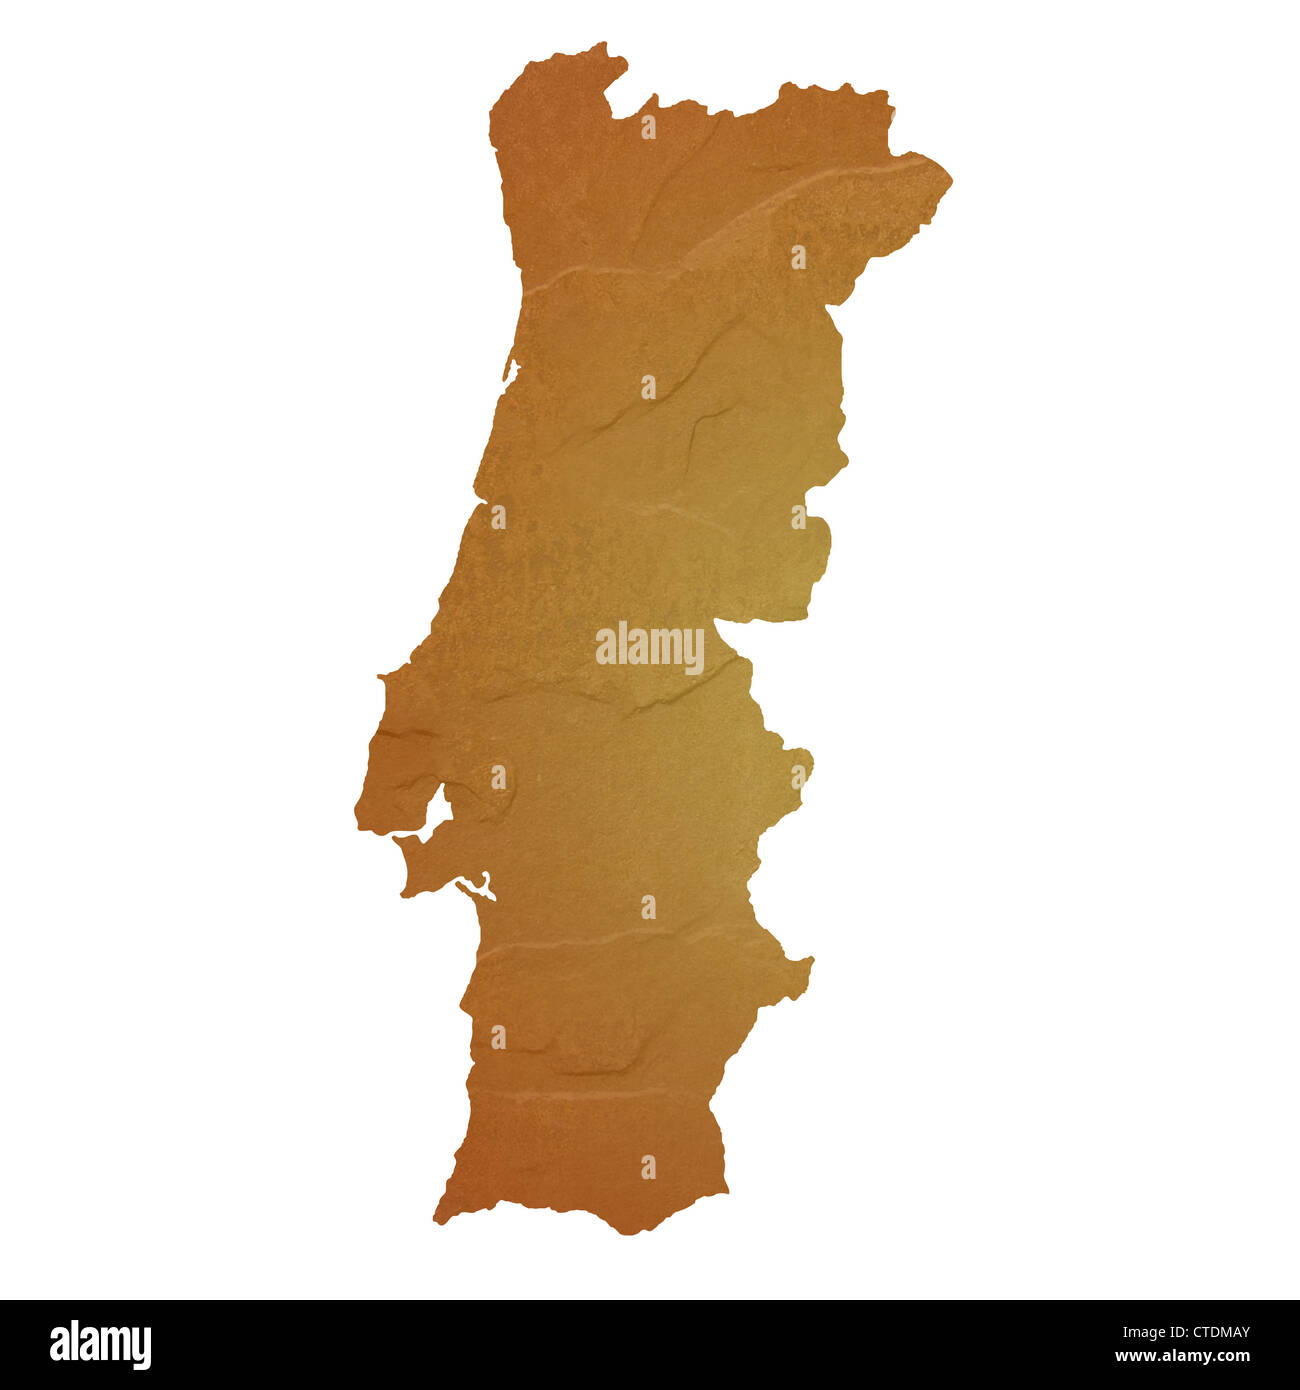 Portugal Map Administrative Divisions Isolated on White Stock